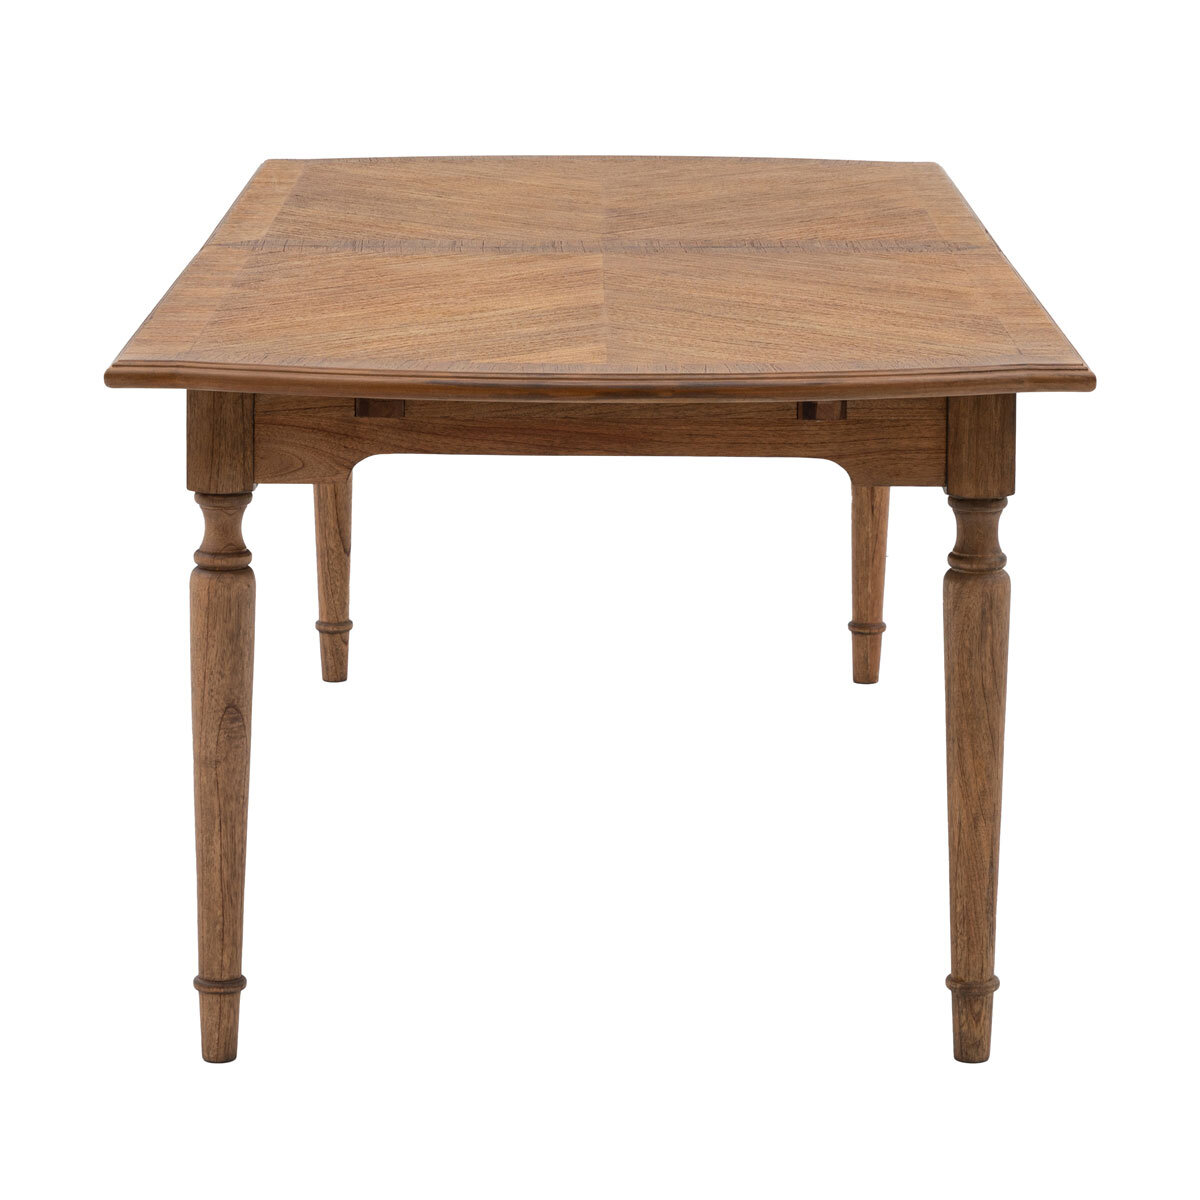 Gallery Highgrove Extending Dining Table, Seats 6- 8